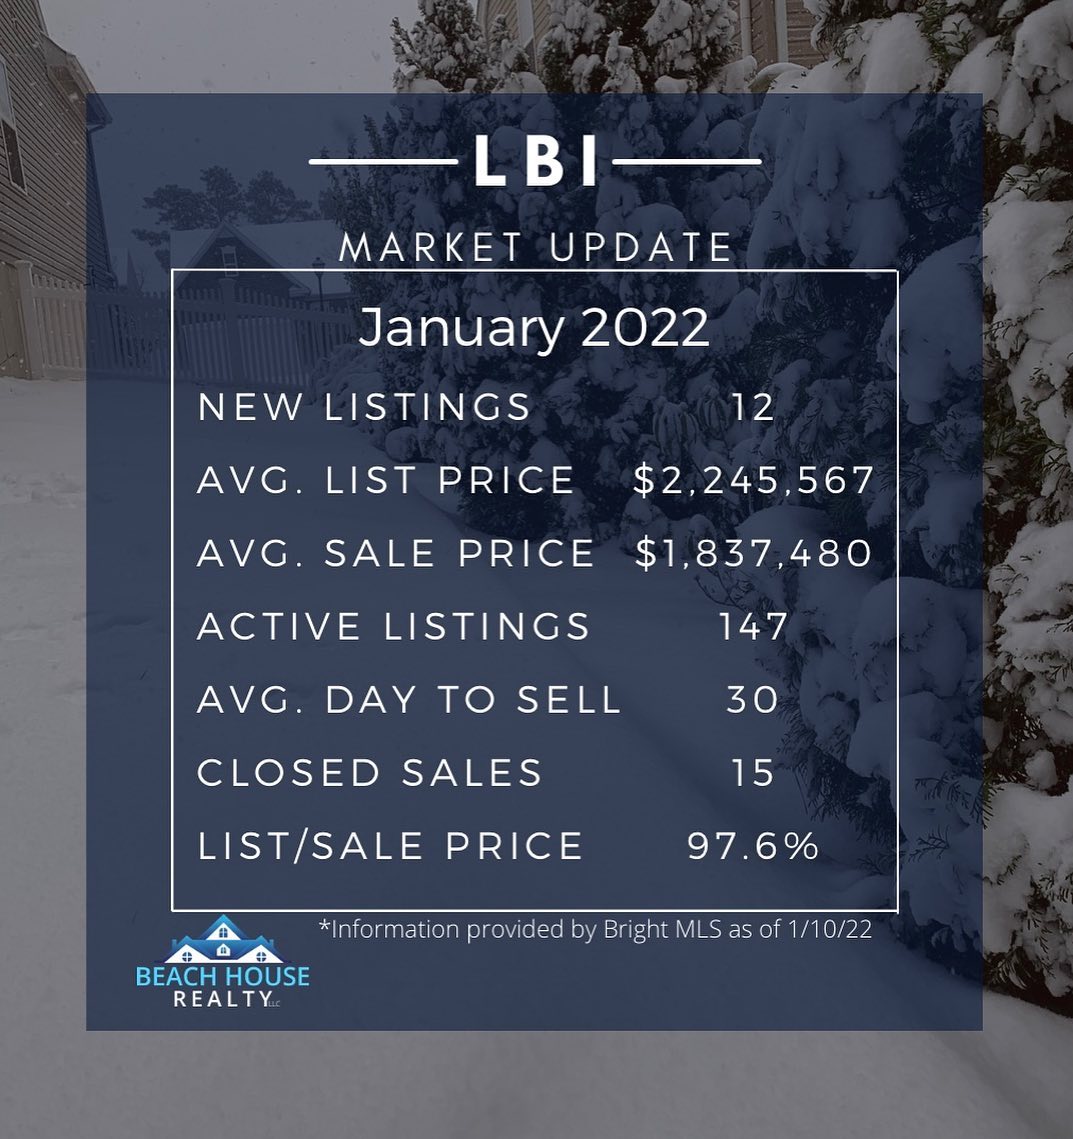 Happy Monday! The market continues to be hot here on LBI! The average sale price...